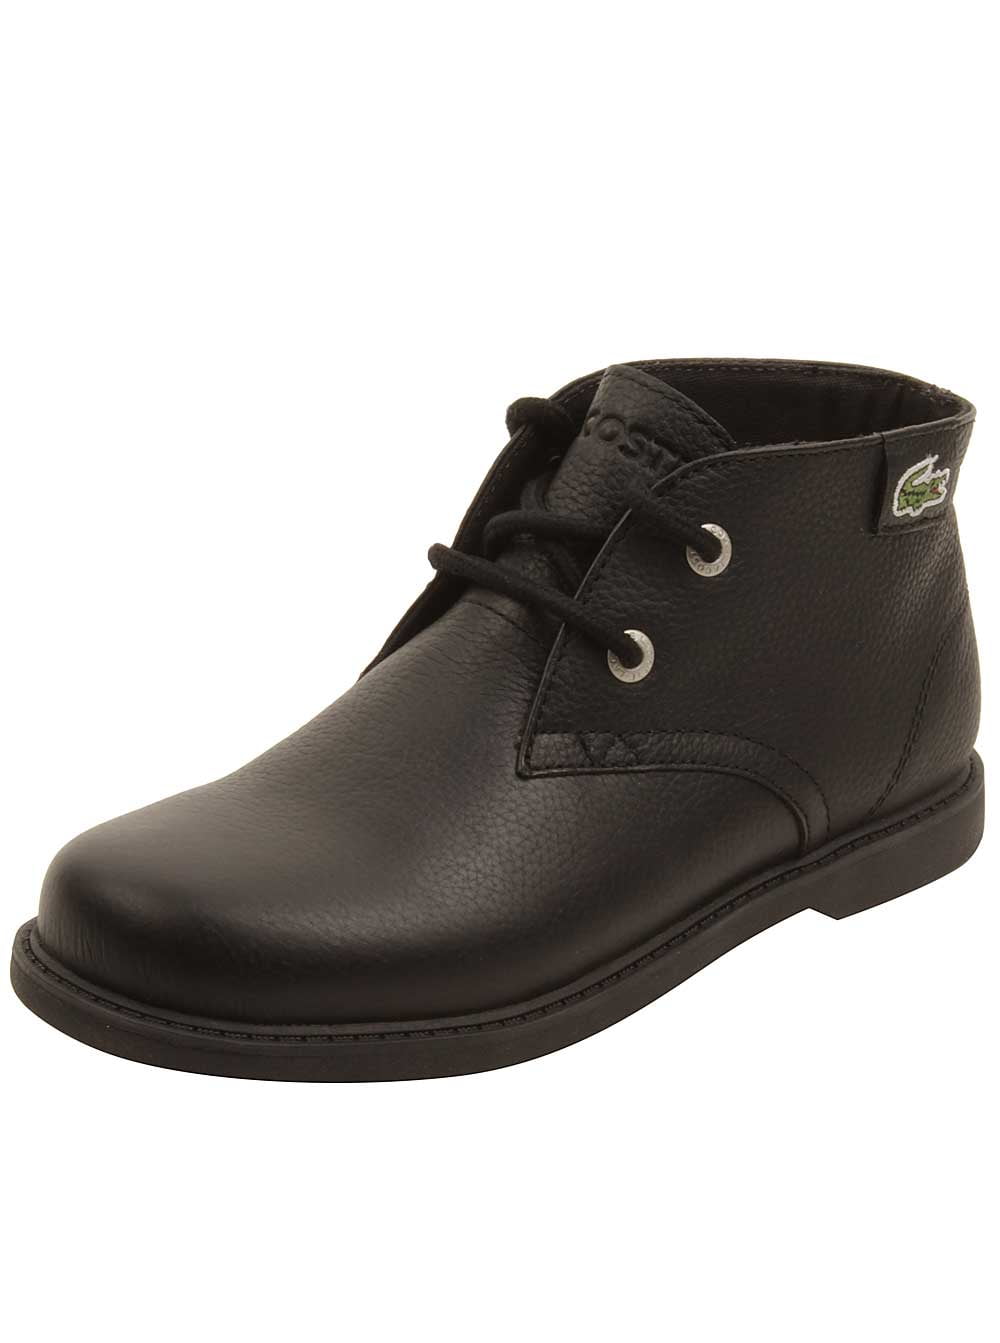 Lacoste Toddler Sherbrook SB Boots in - Walmart.com